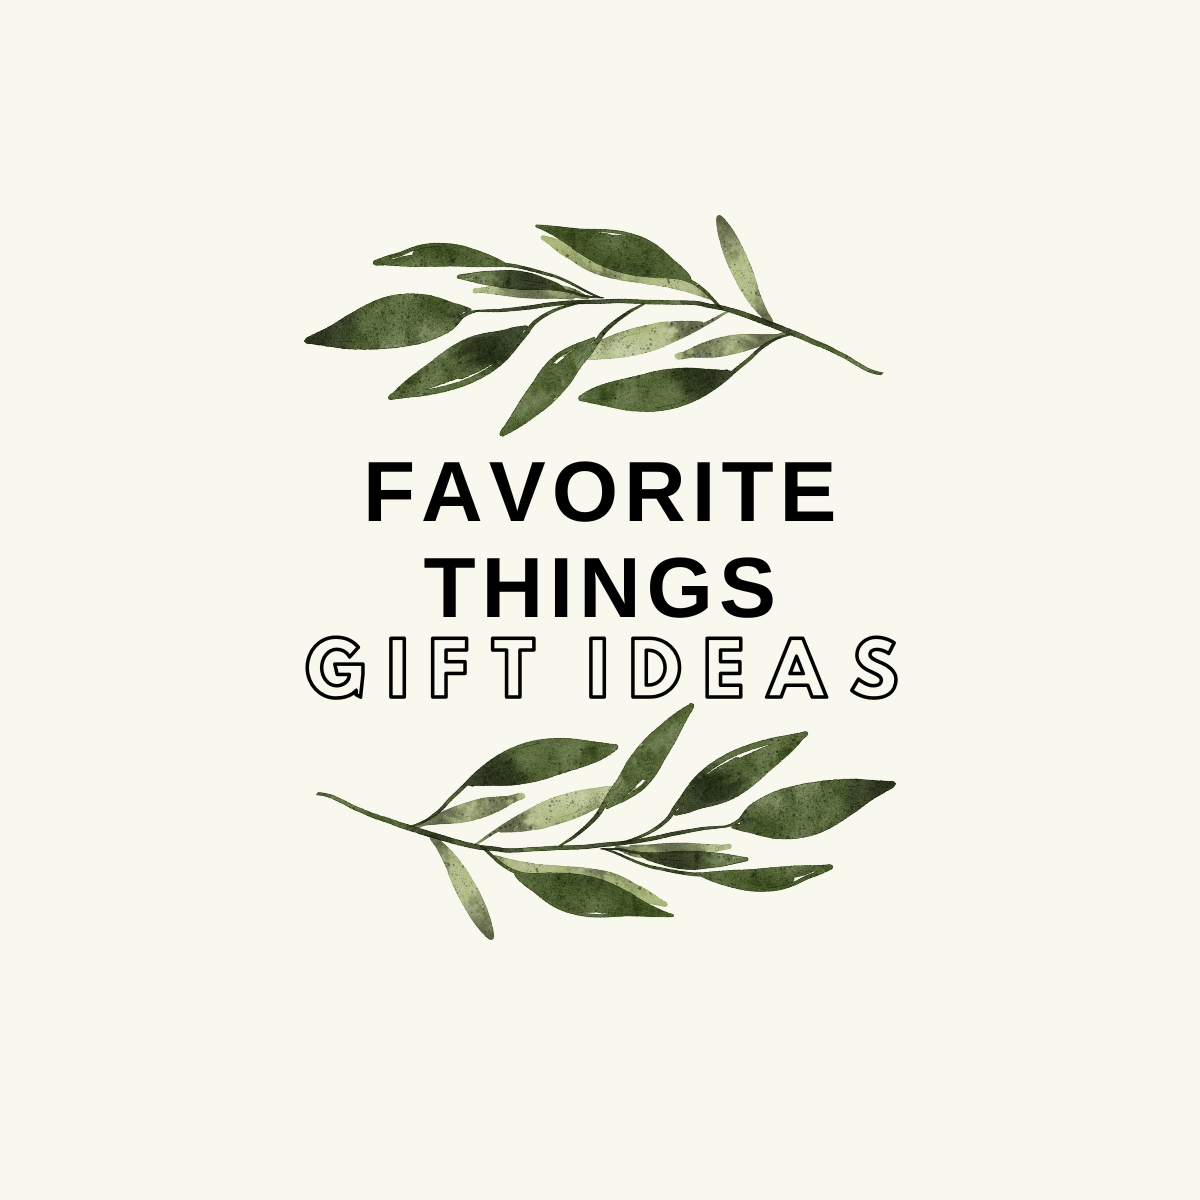 my own list of “favorite things” for gift ideas